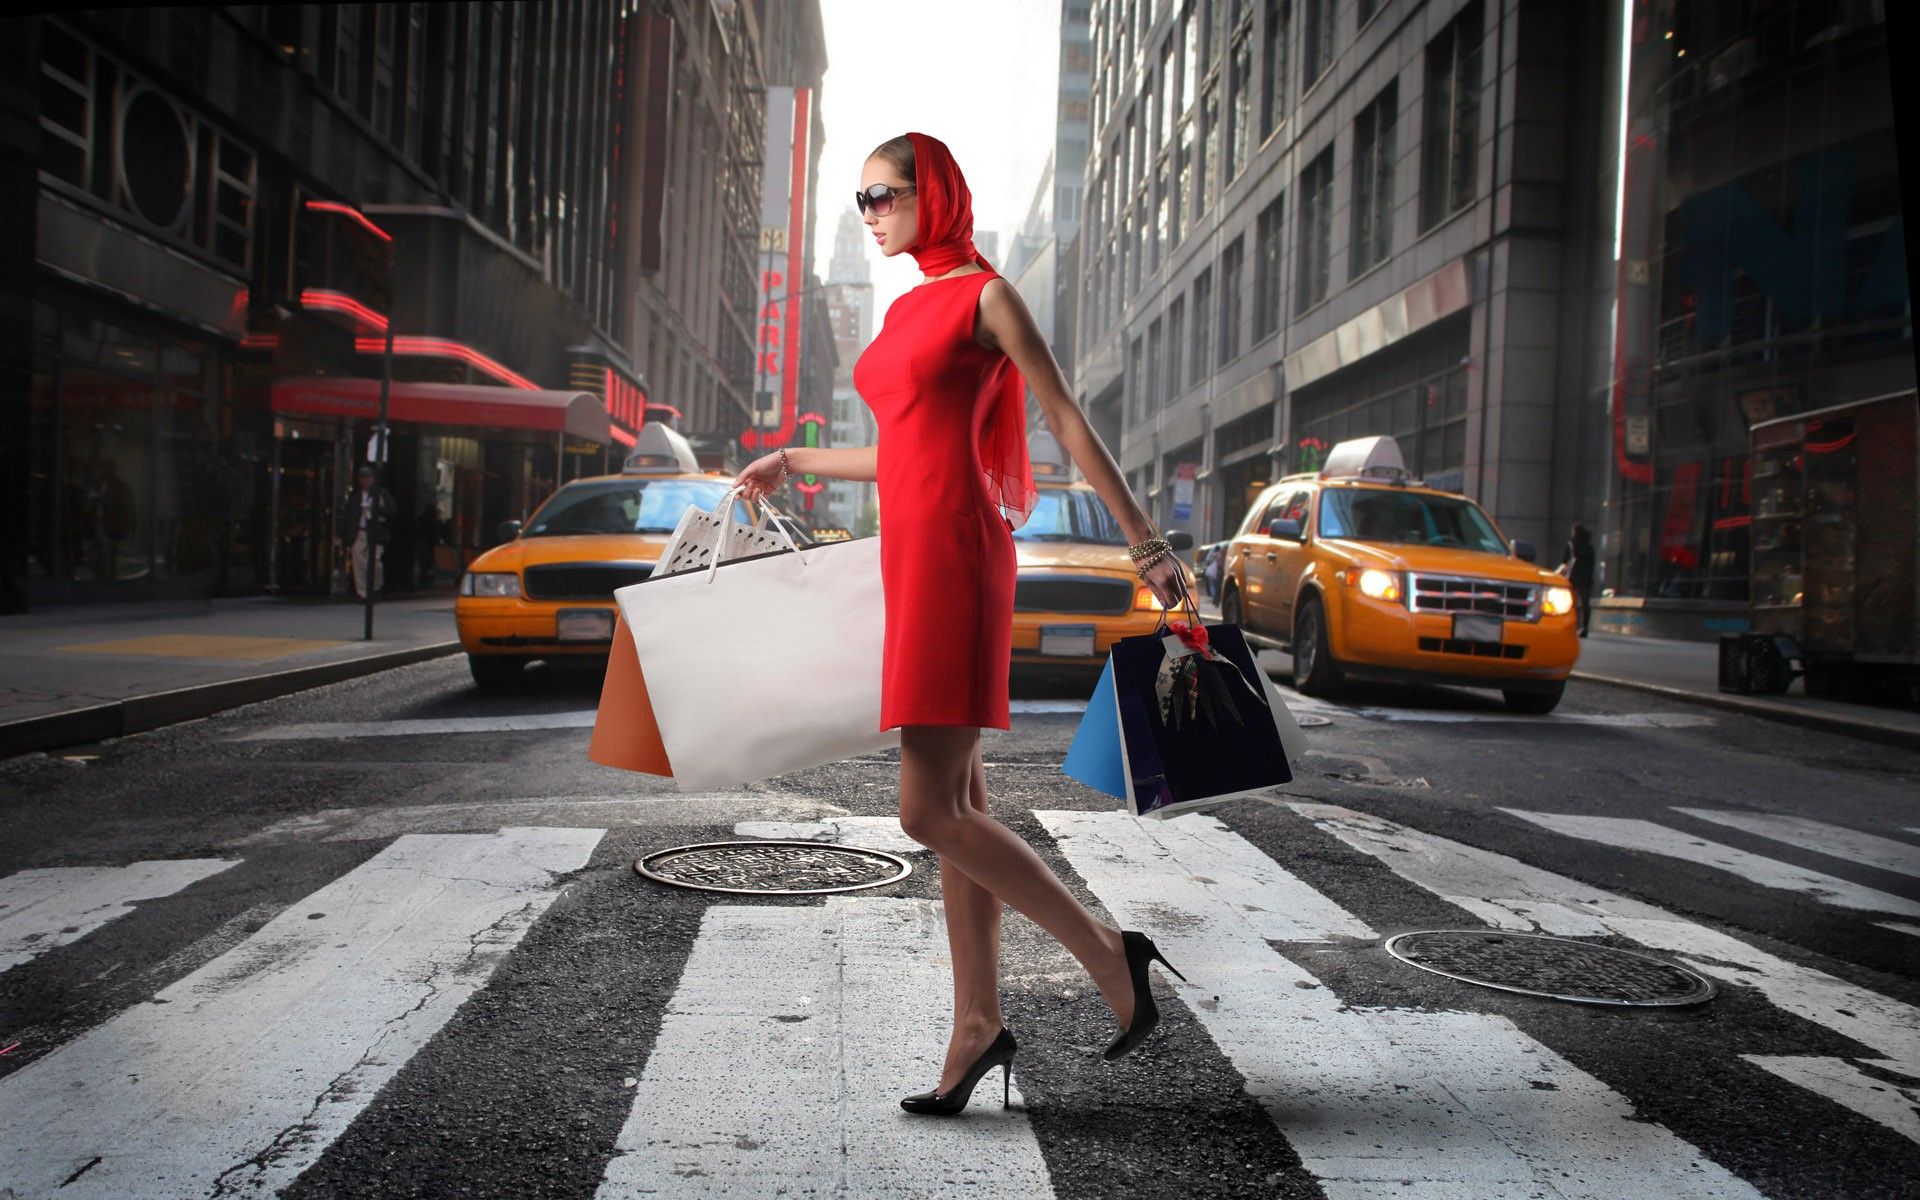 Women streets shopping crossing high heels taxi red dress